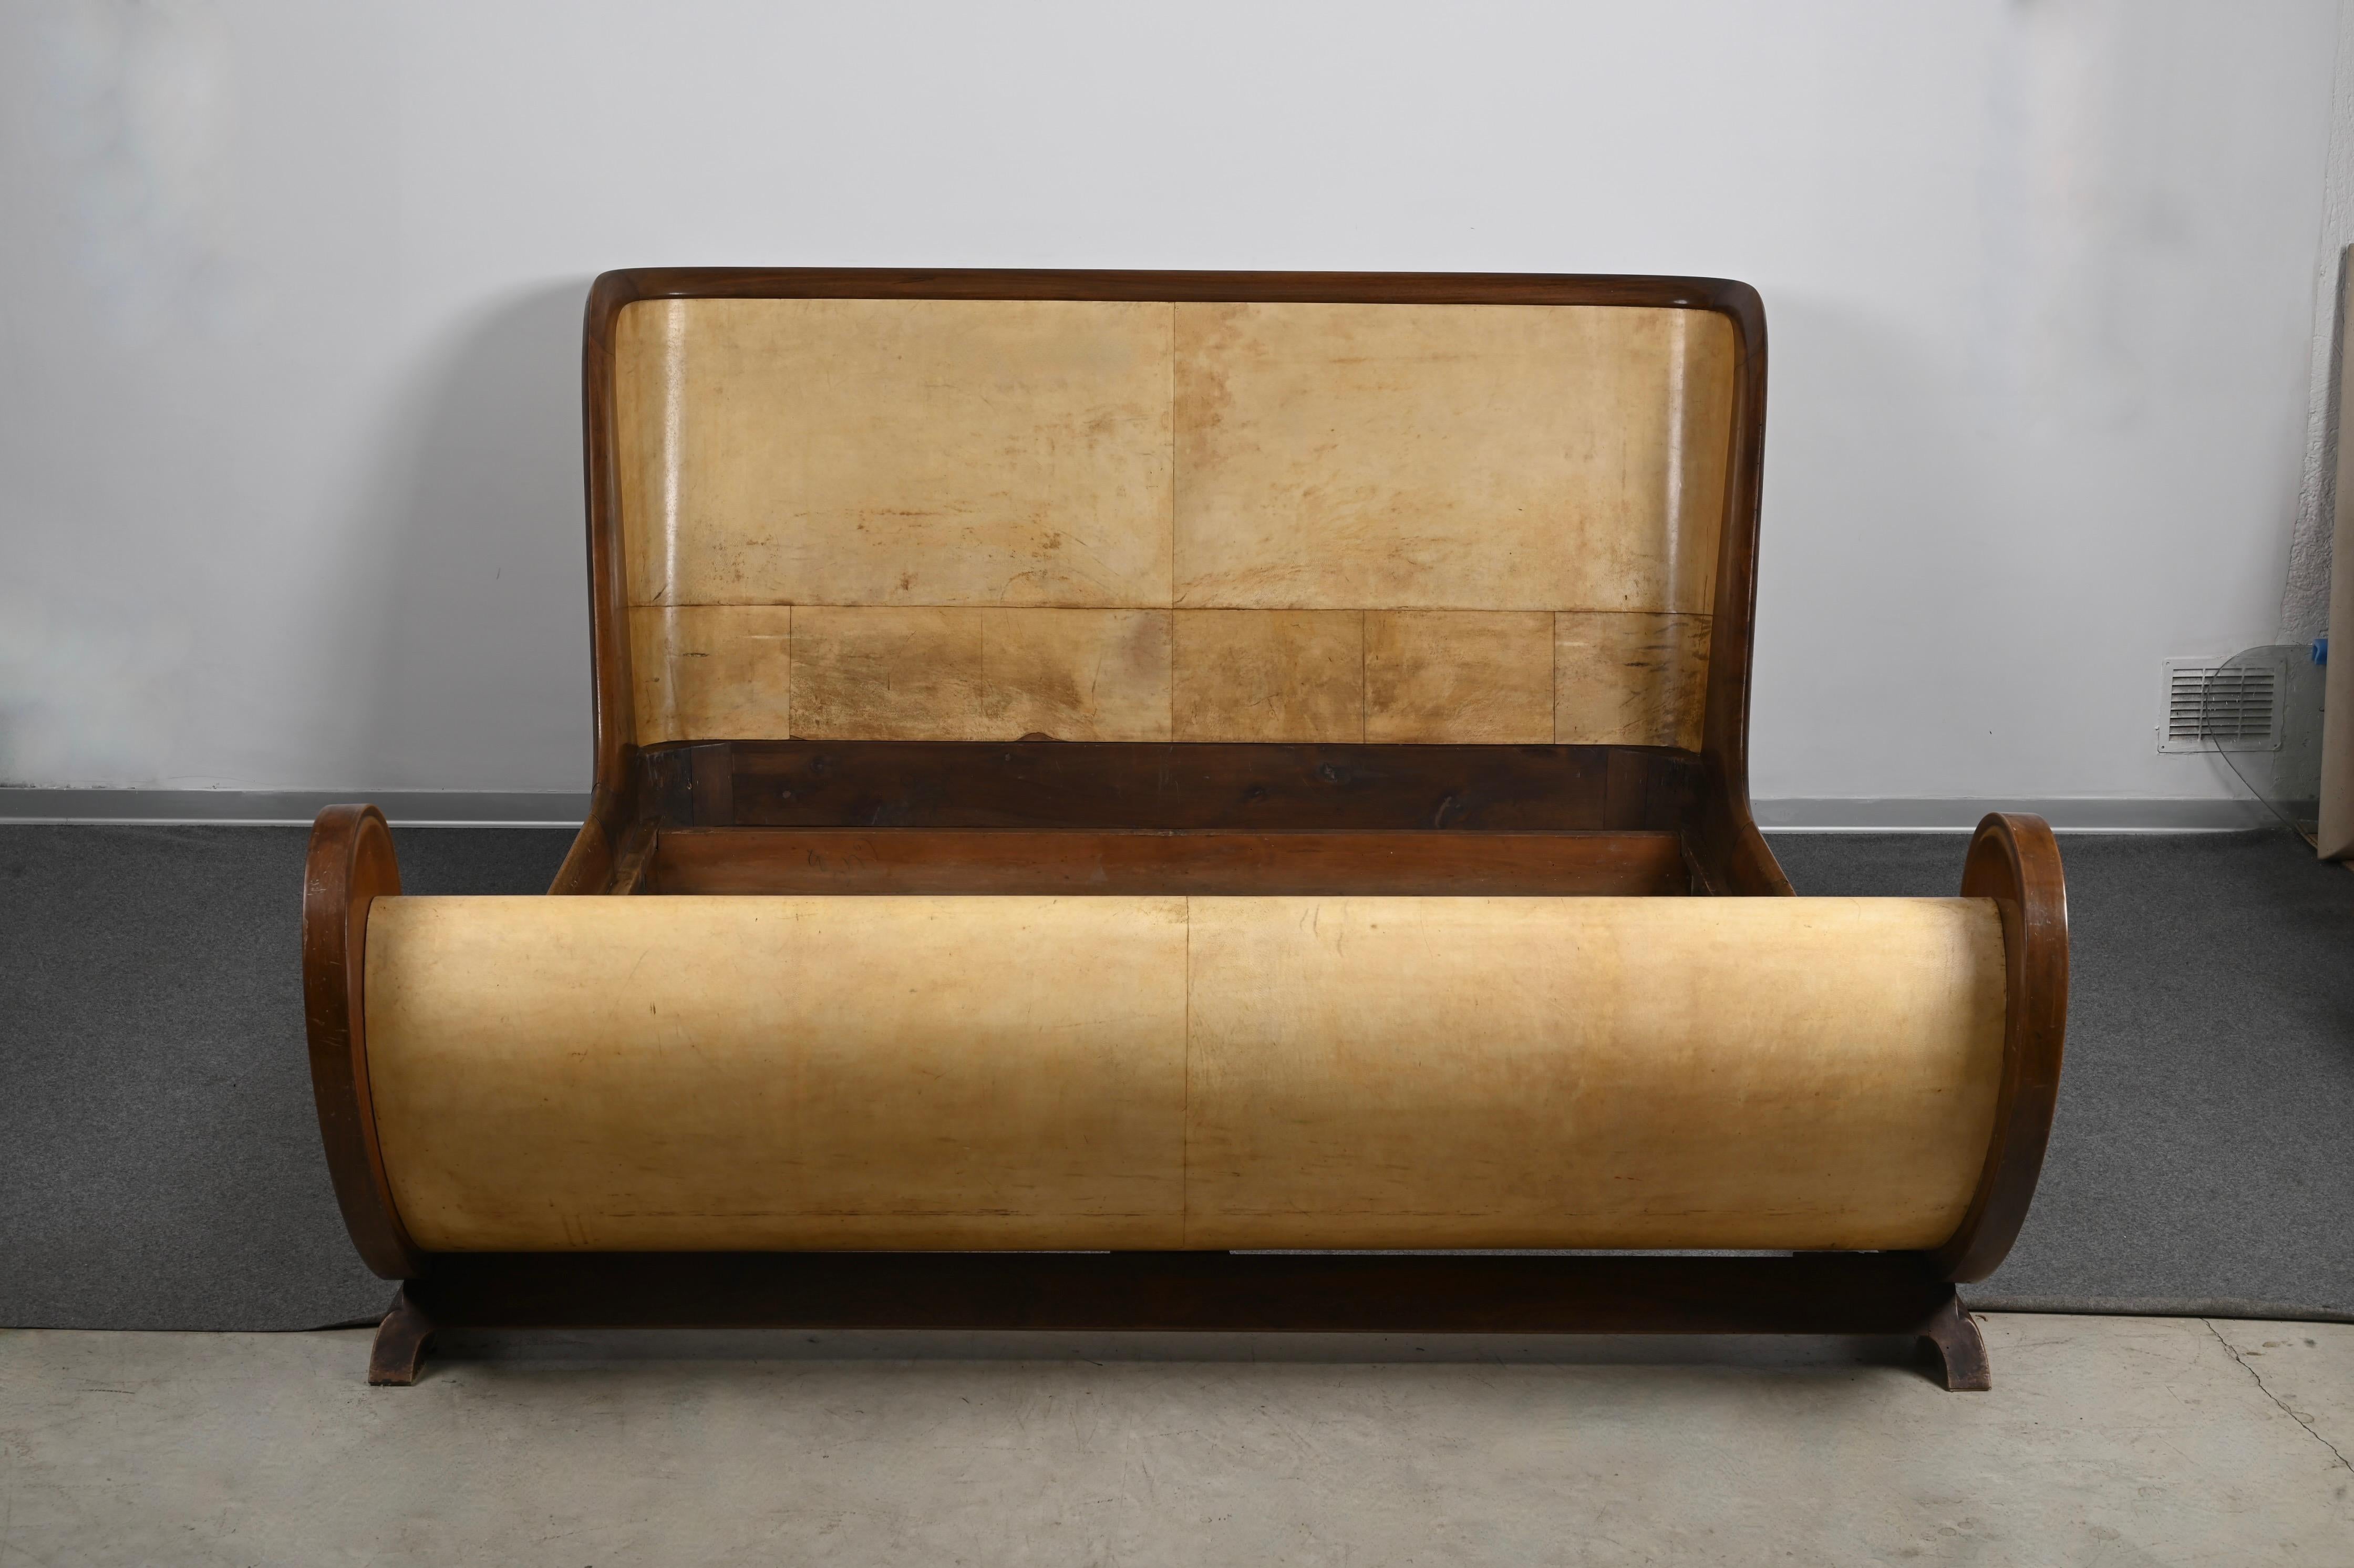 Incredible bed in parchment and wood produced in Italy during the 30s and signed Valzania Italia.

Due to the sinuous lines, the Art Deco design and the high-skilled combination of materials, this incredible masterpiece is attributed to Guglielmo